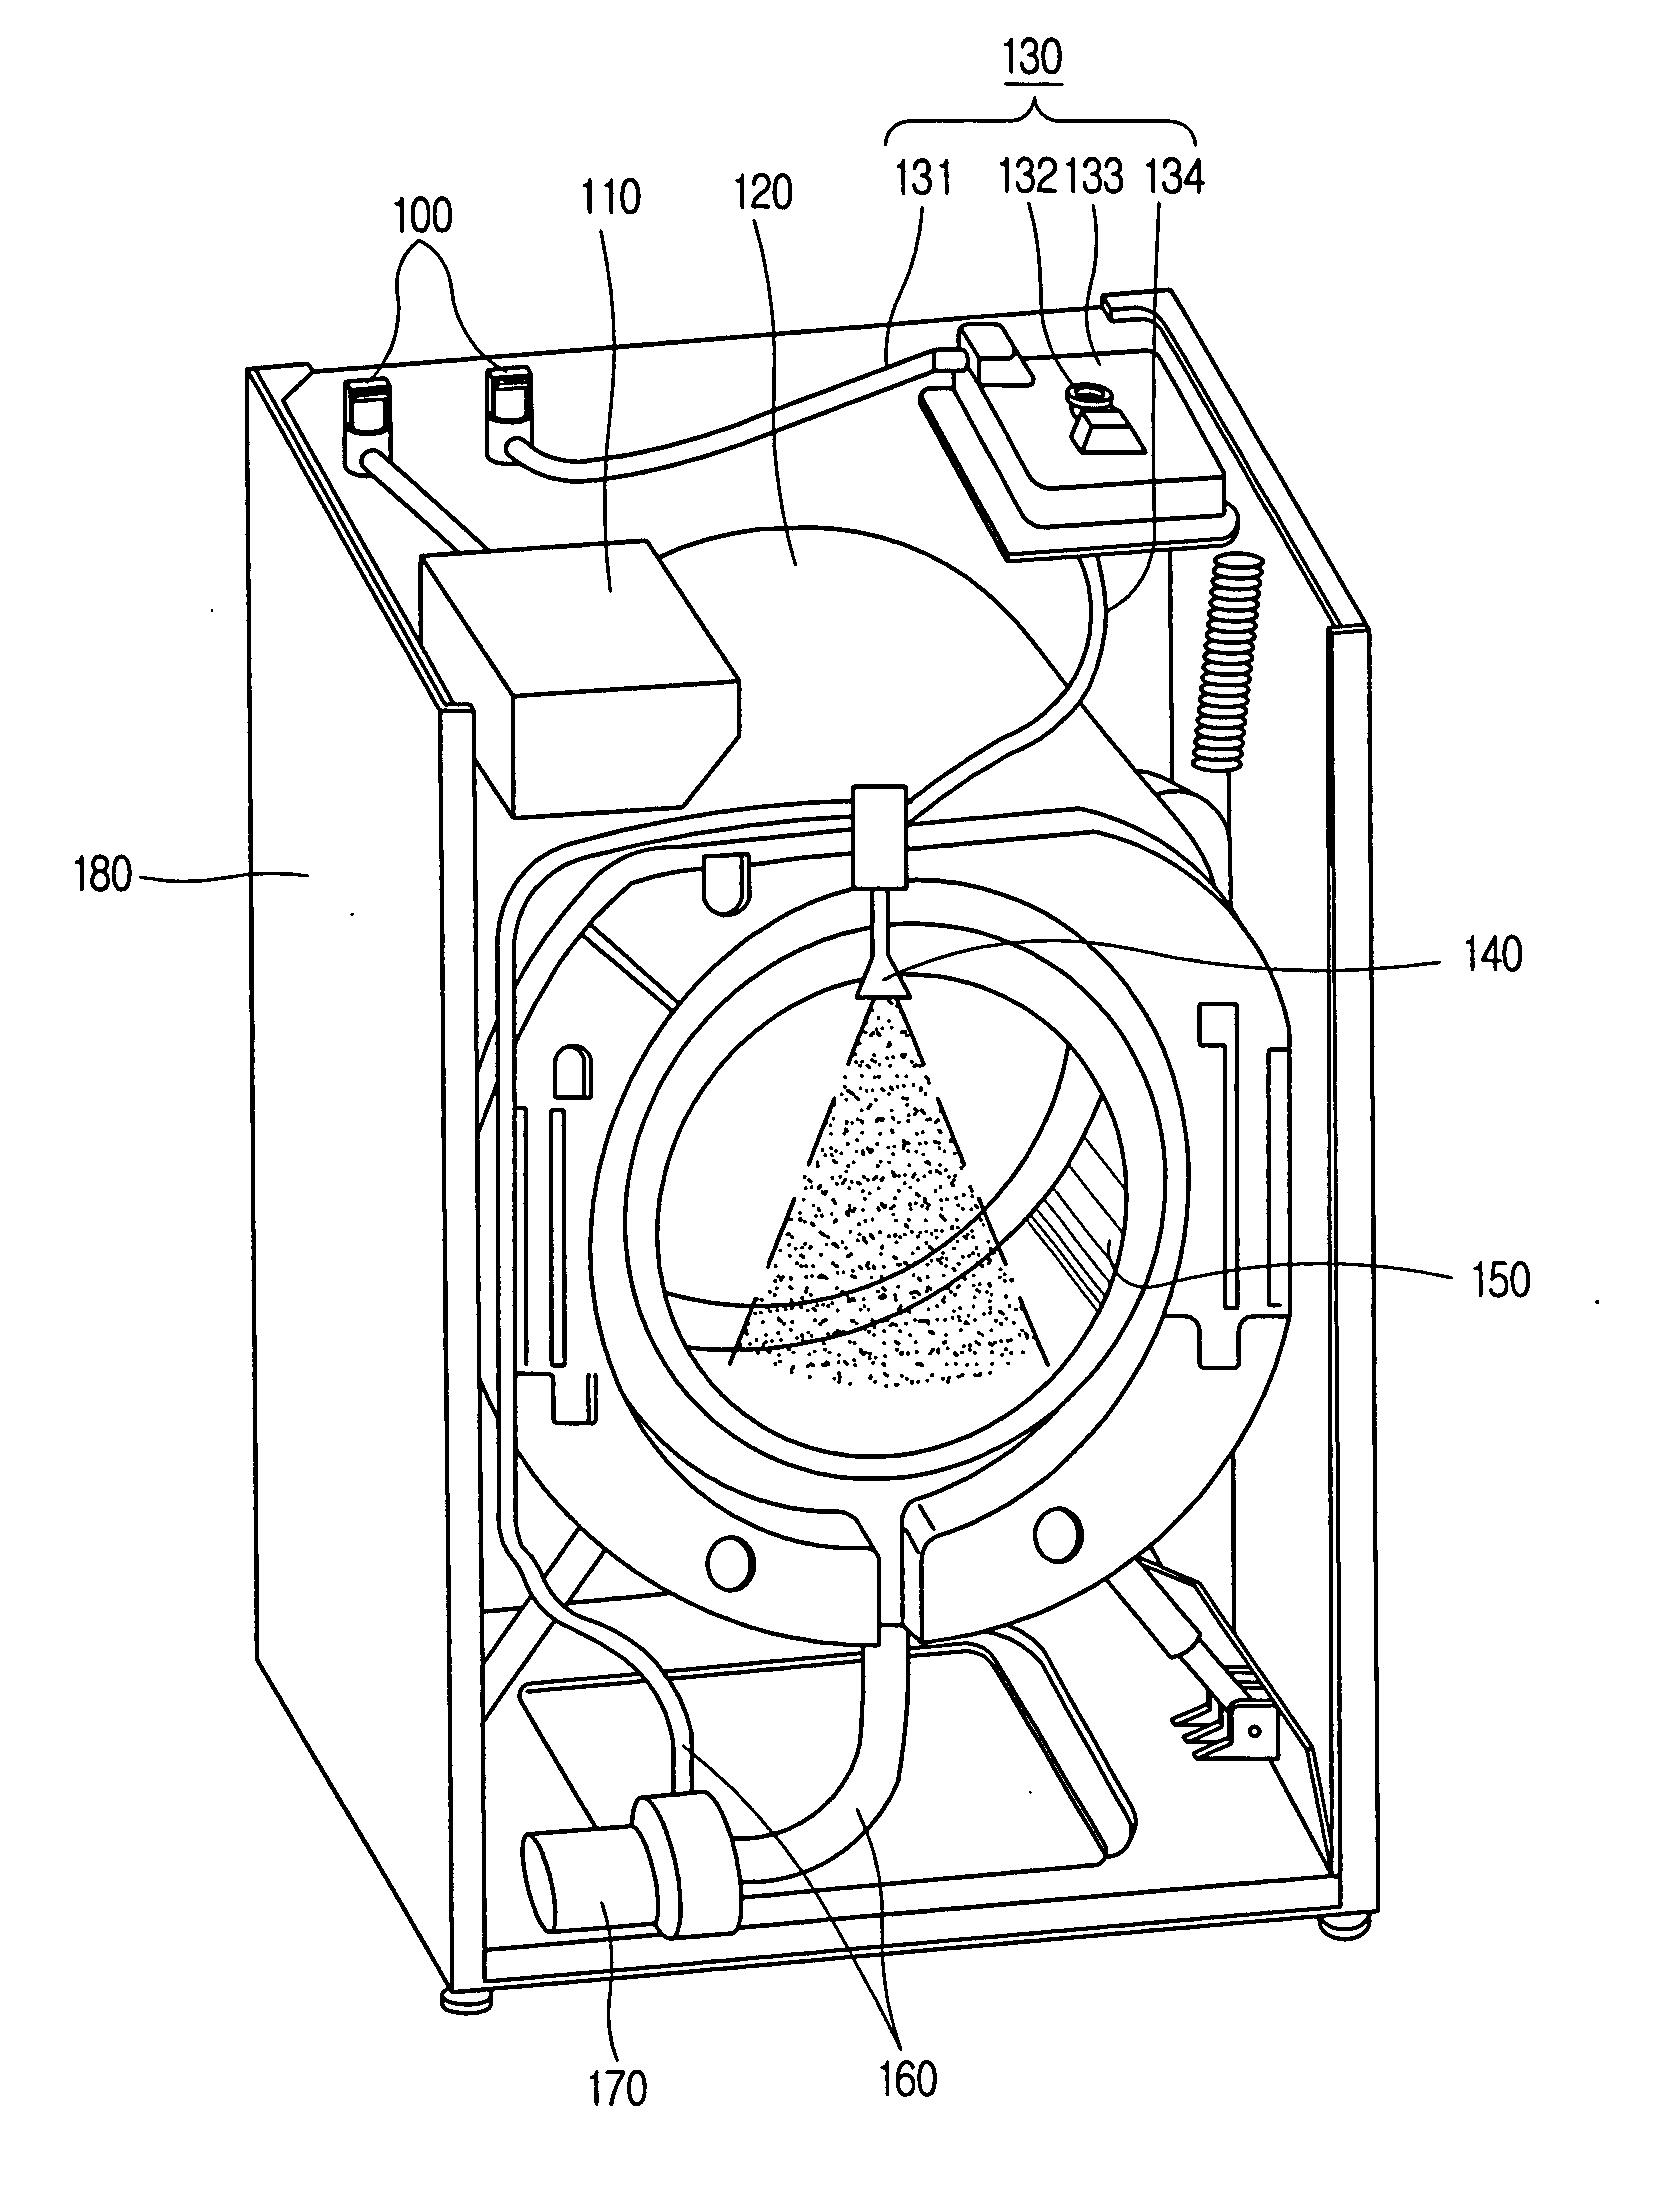 Apparatus and method for controlling steam generating unit of washing machine